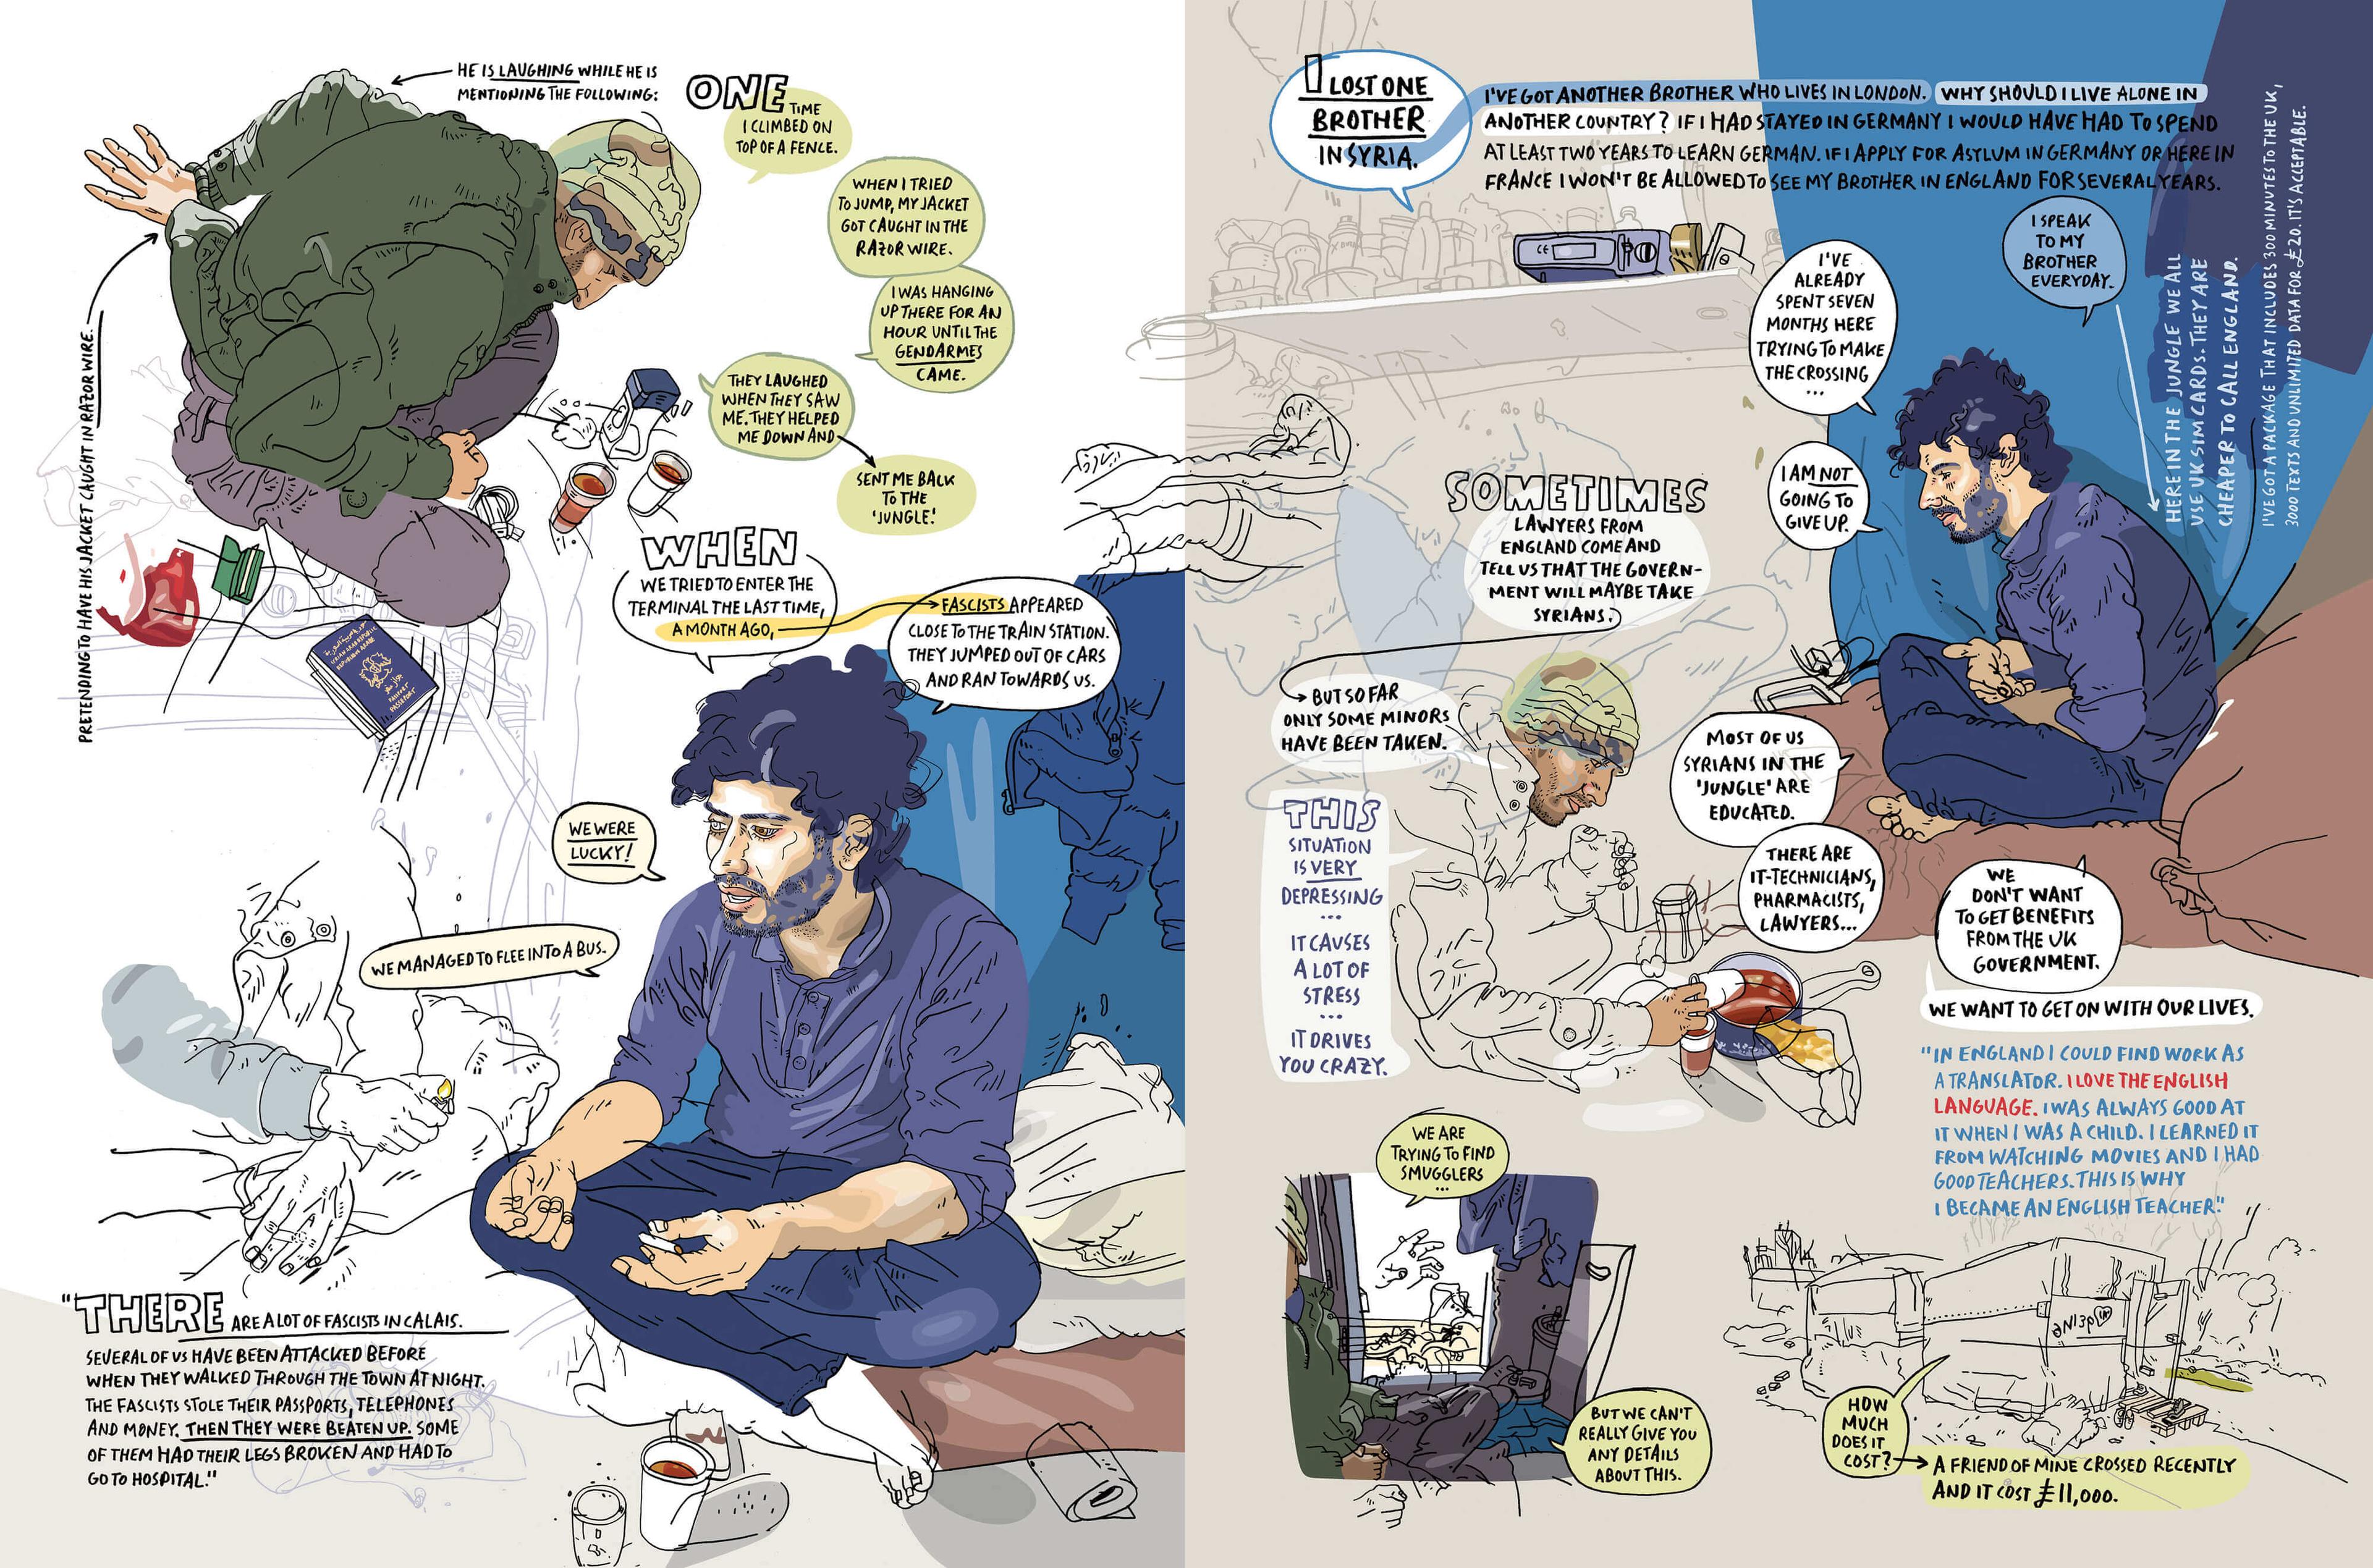 A reportage comic spread depicting the story of a Syrian refugee